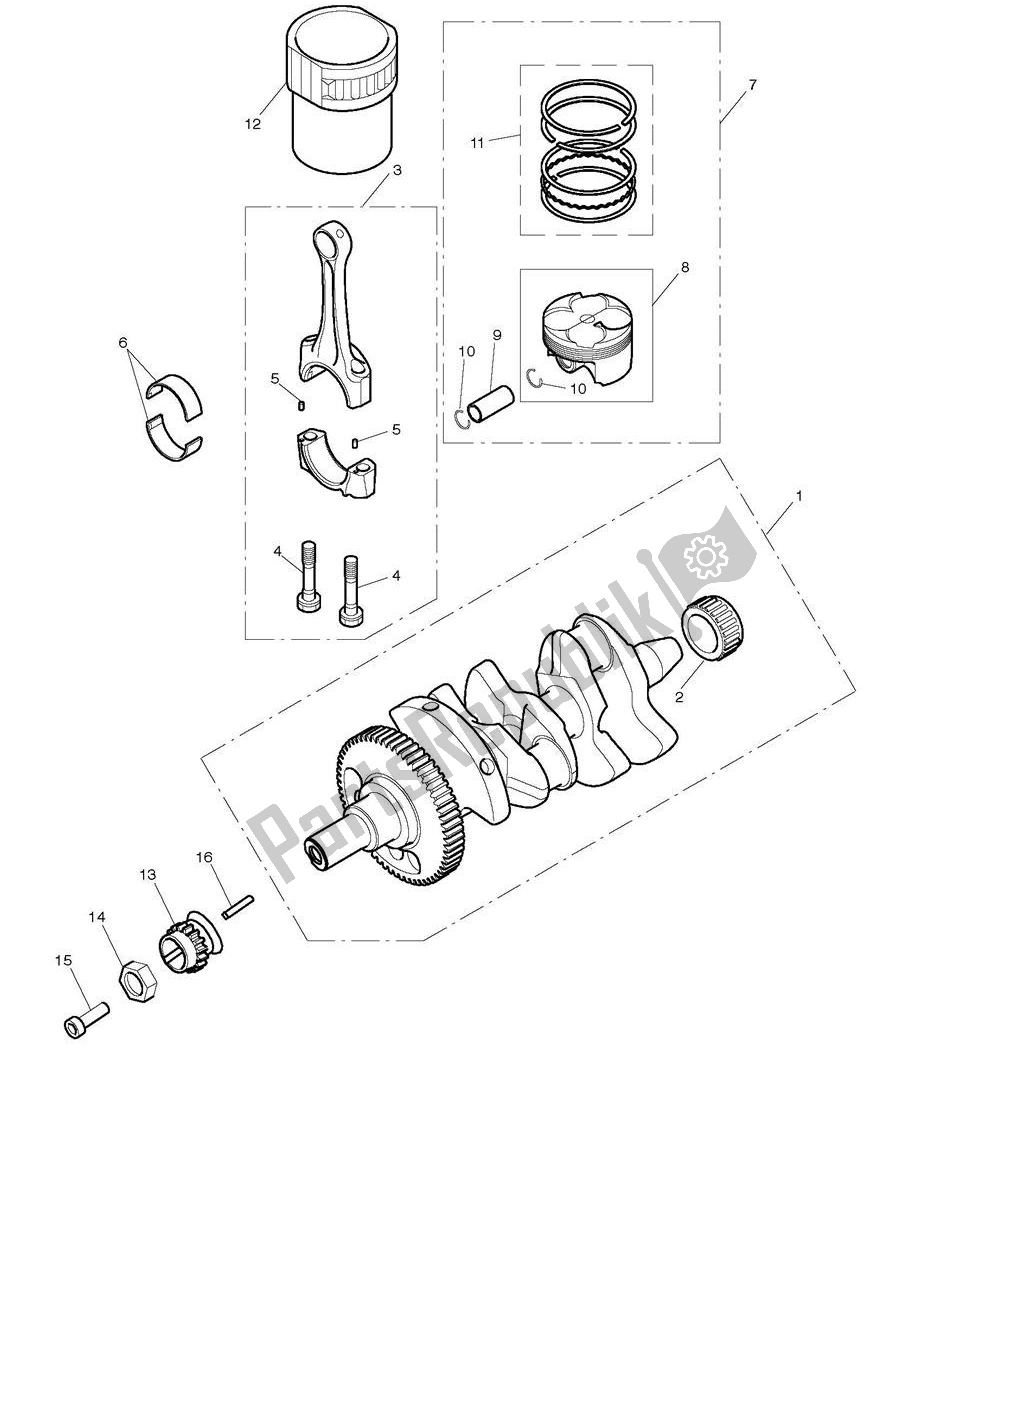 All parts for the Crankshaft, Connecting Rods, Pistons & Liners of the Triumph Street Triple 675 2008 - 2012